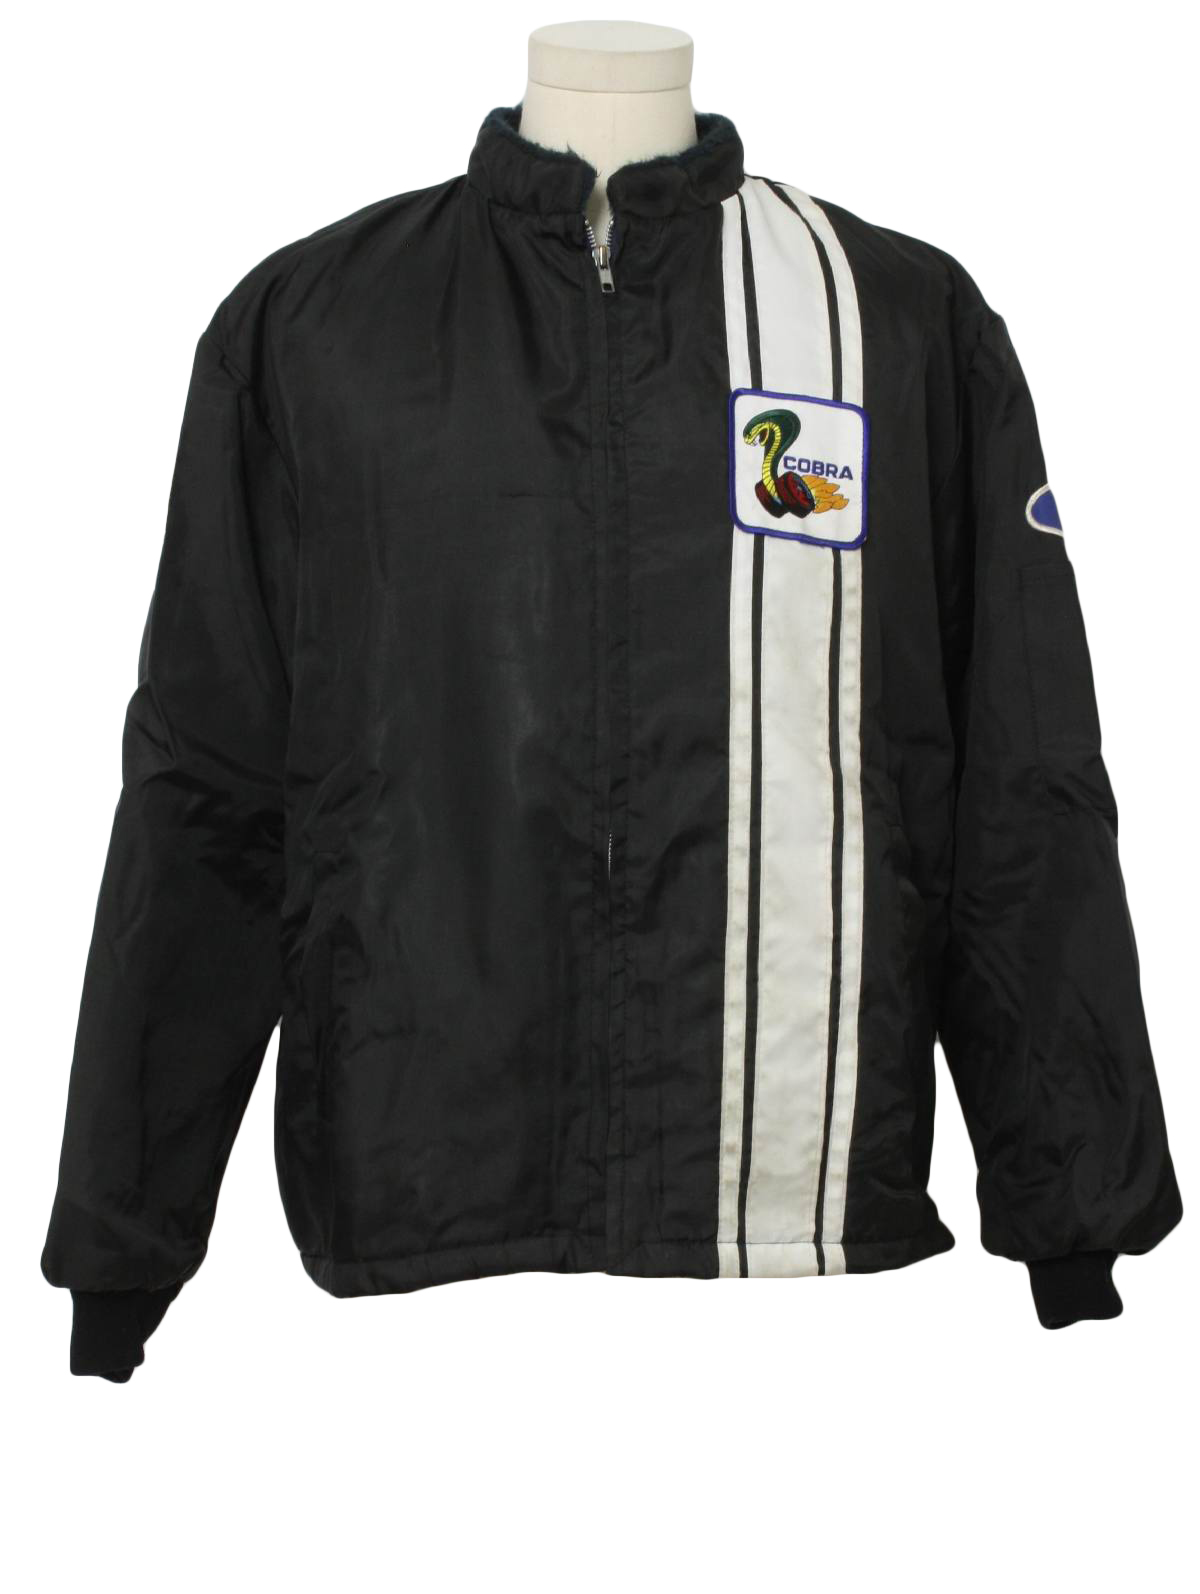 Ford racing jacket with cobra logo on it #9